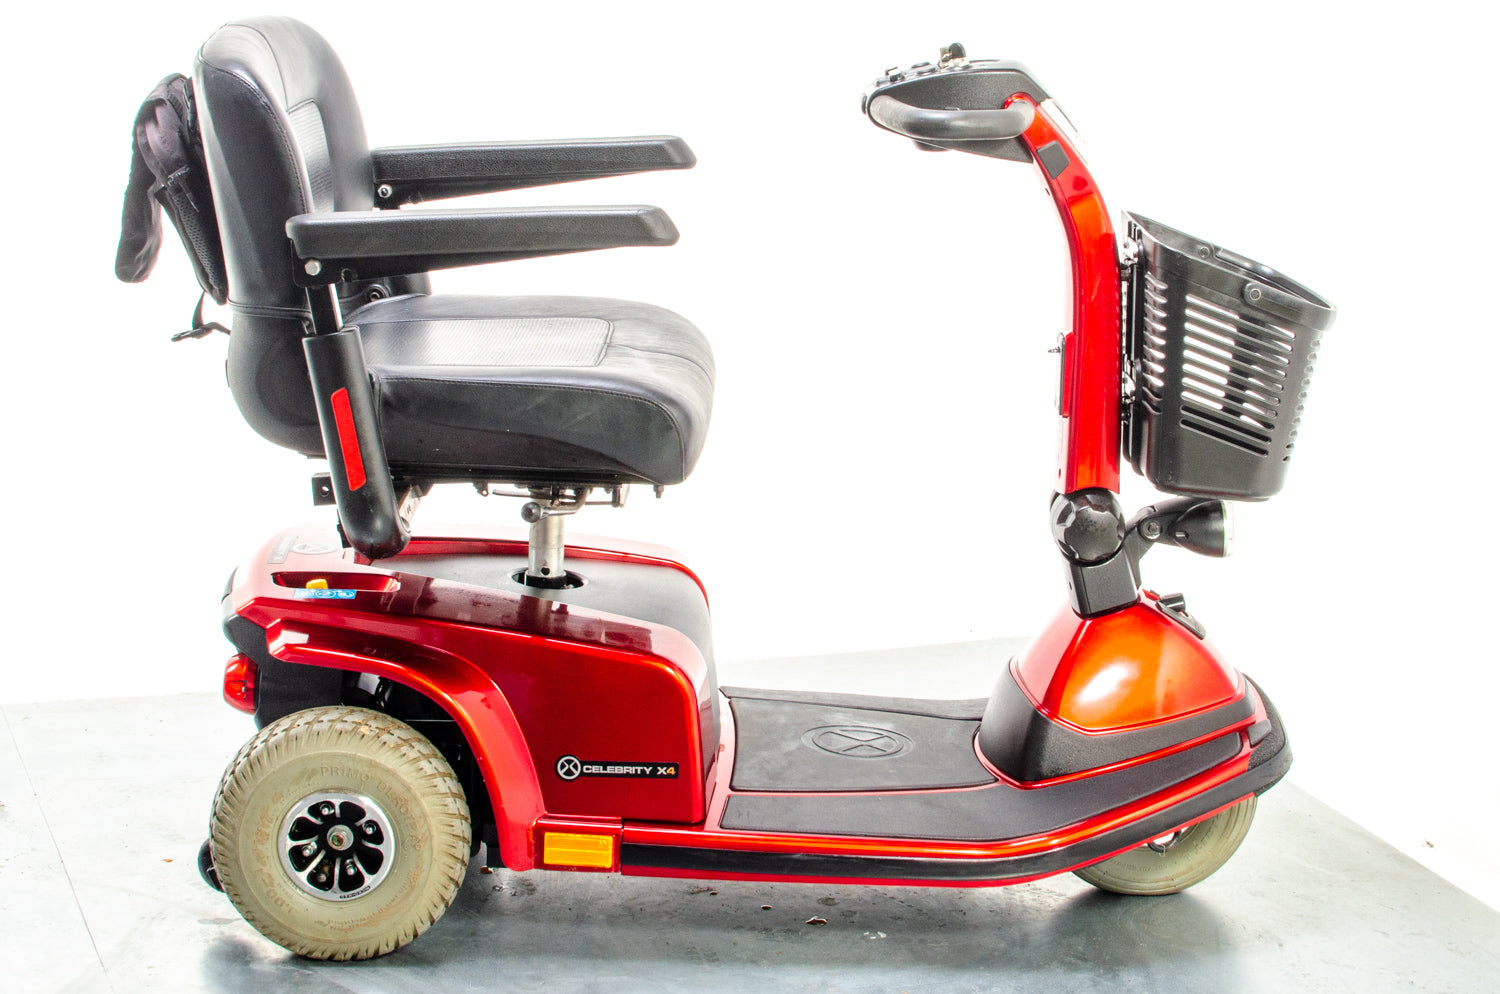 Pride Celebrity X4 Used 3 Wheel Mobility Scooter Trike Comfy Pneumatic Tyres Pavement